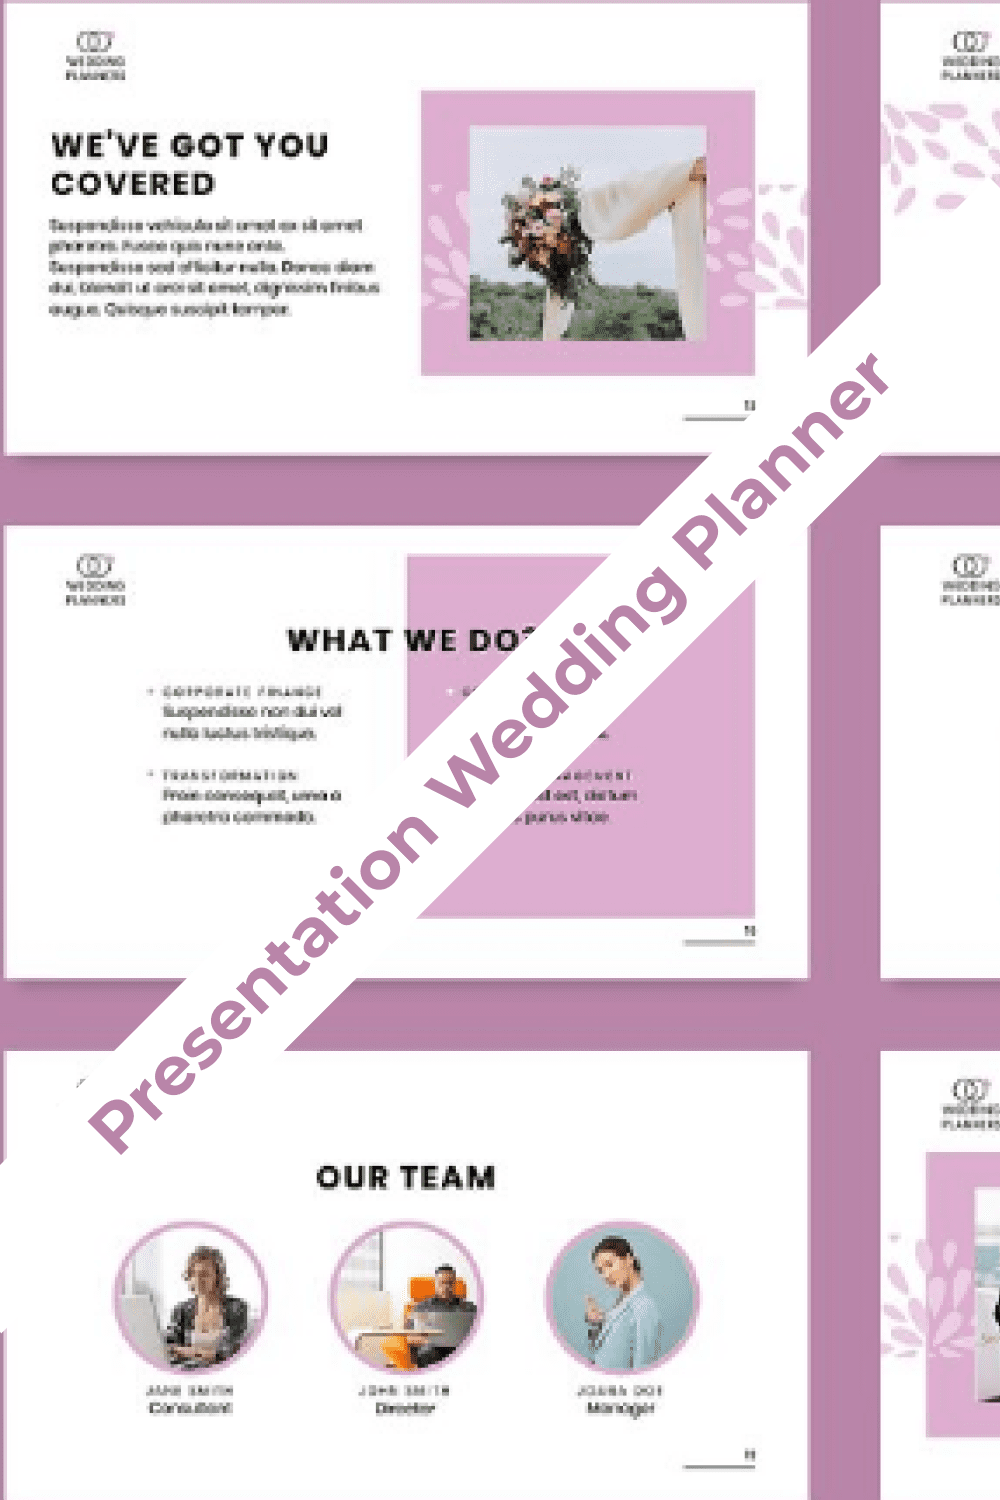 Big pink template for wedding.